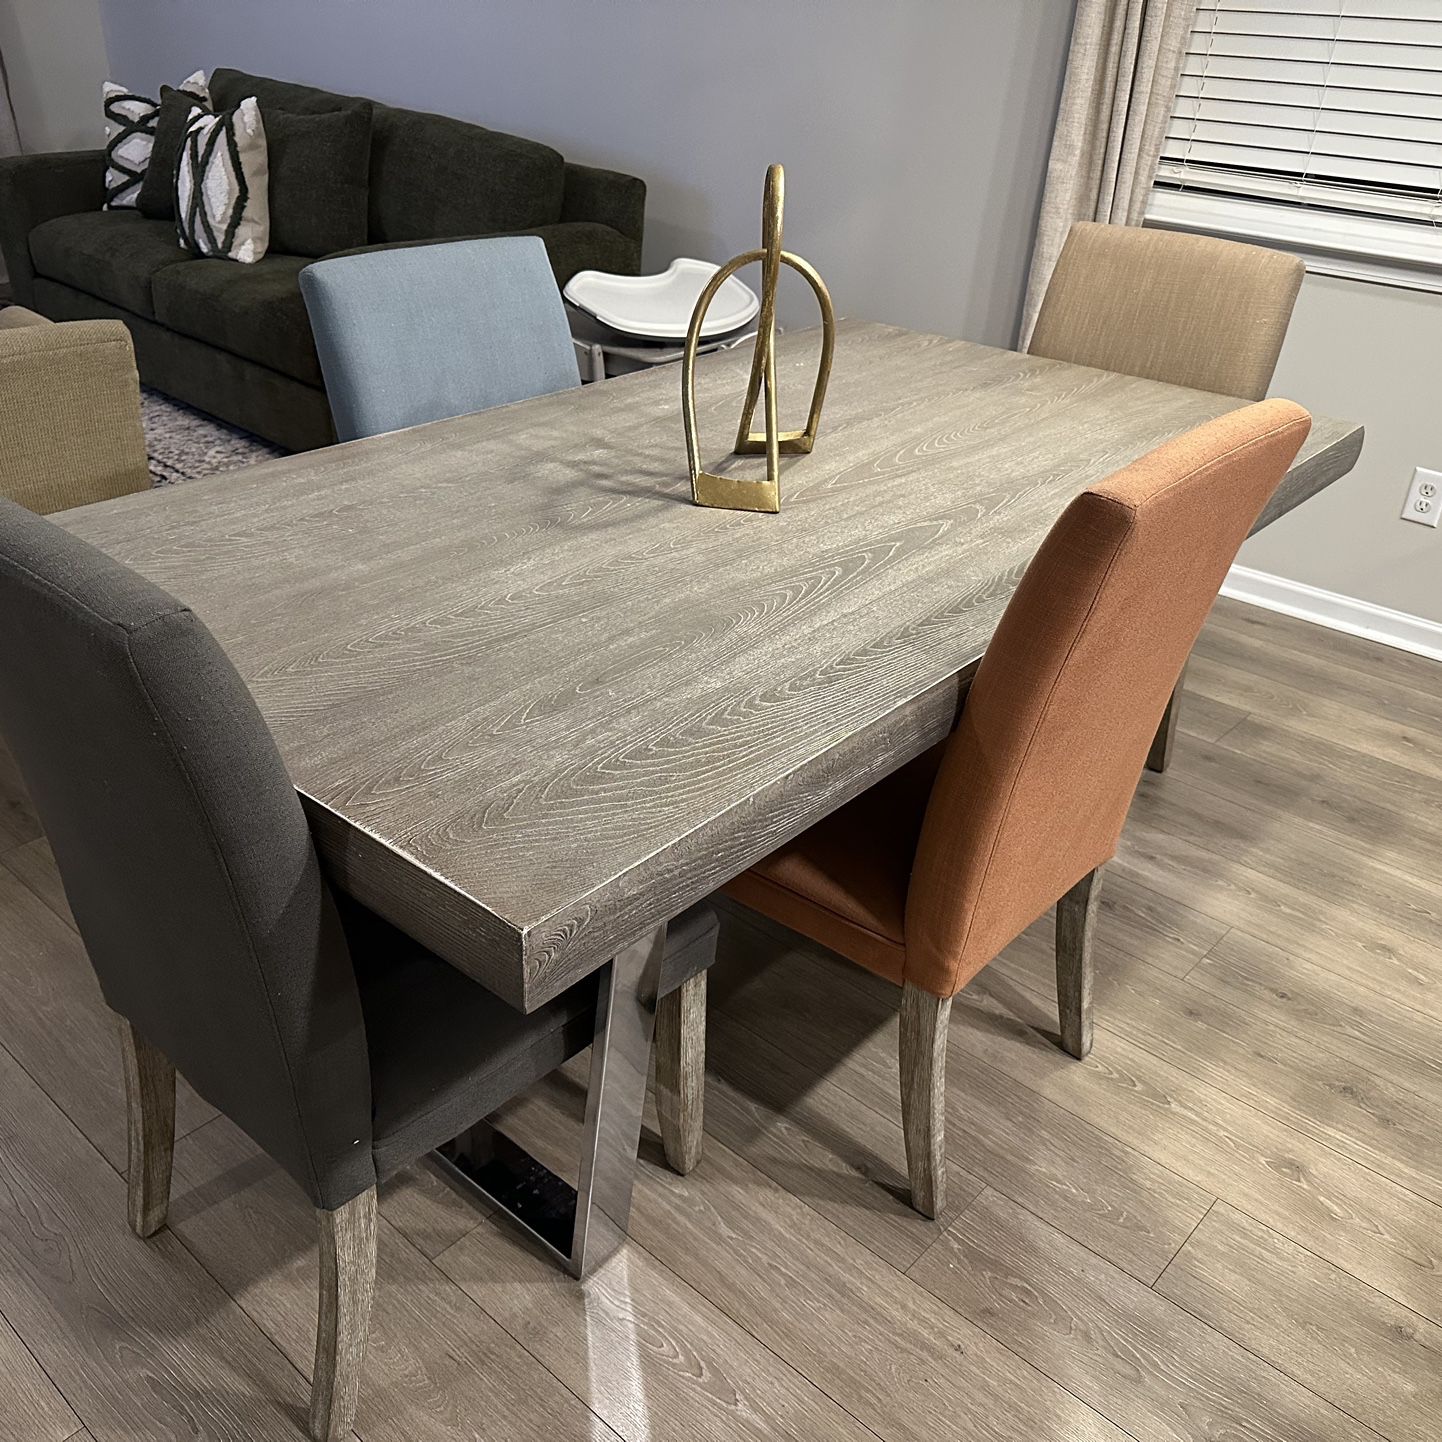 Dinning Table With 4 Chairs 